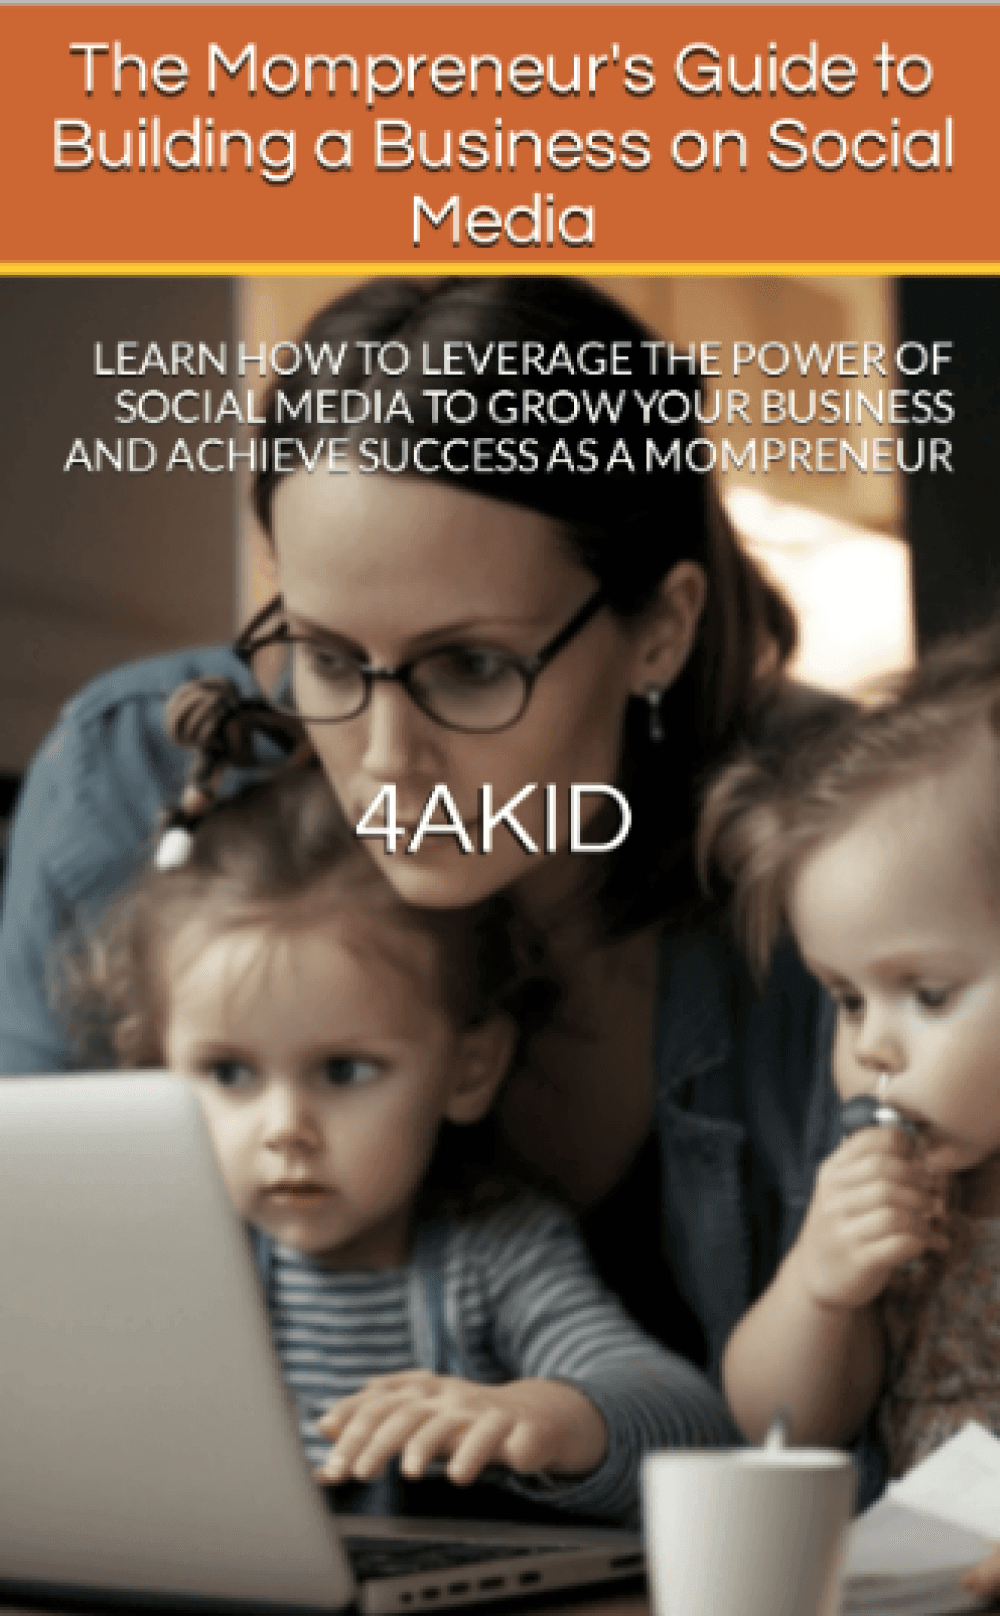 The Mompreneur's Guide to Building a Business on Social Media Digital E-Book - 4aKid